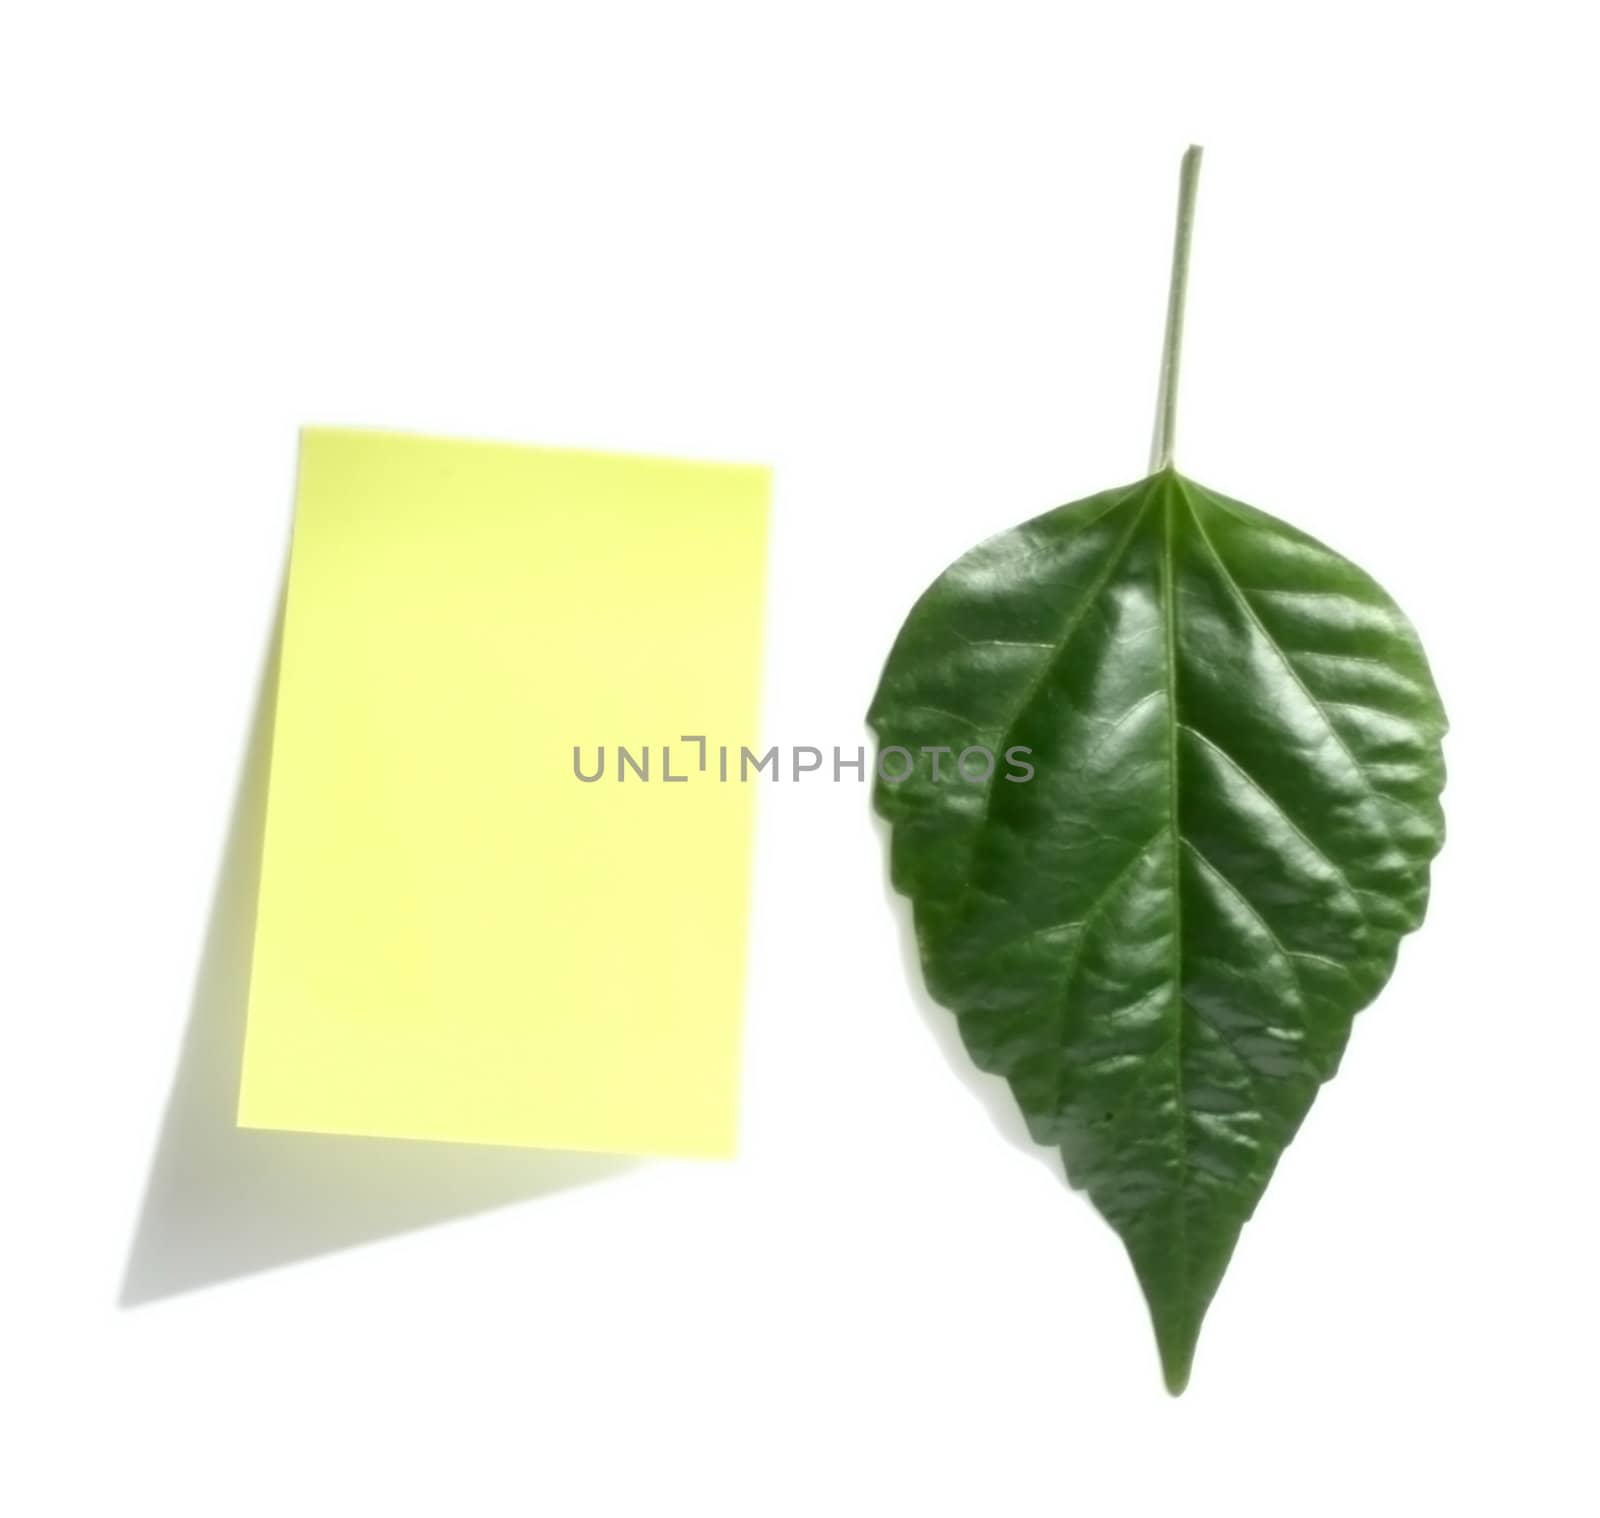 Paper for notes and a sheet of a tree on a white background.